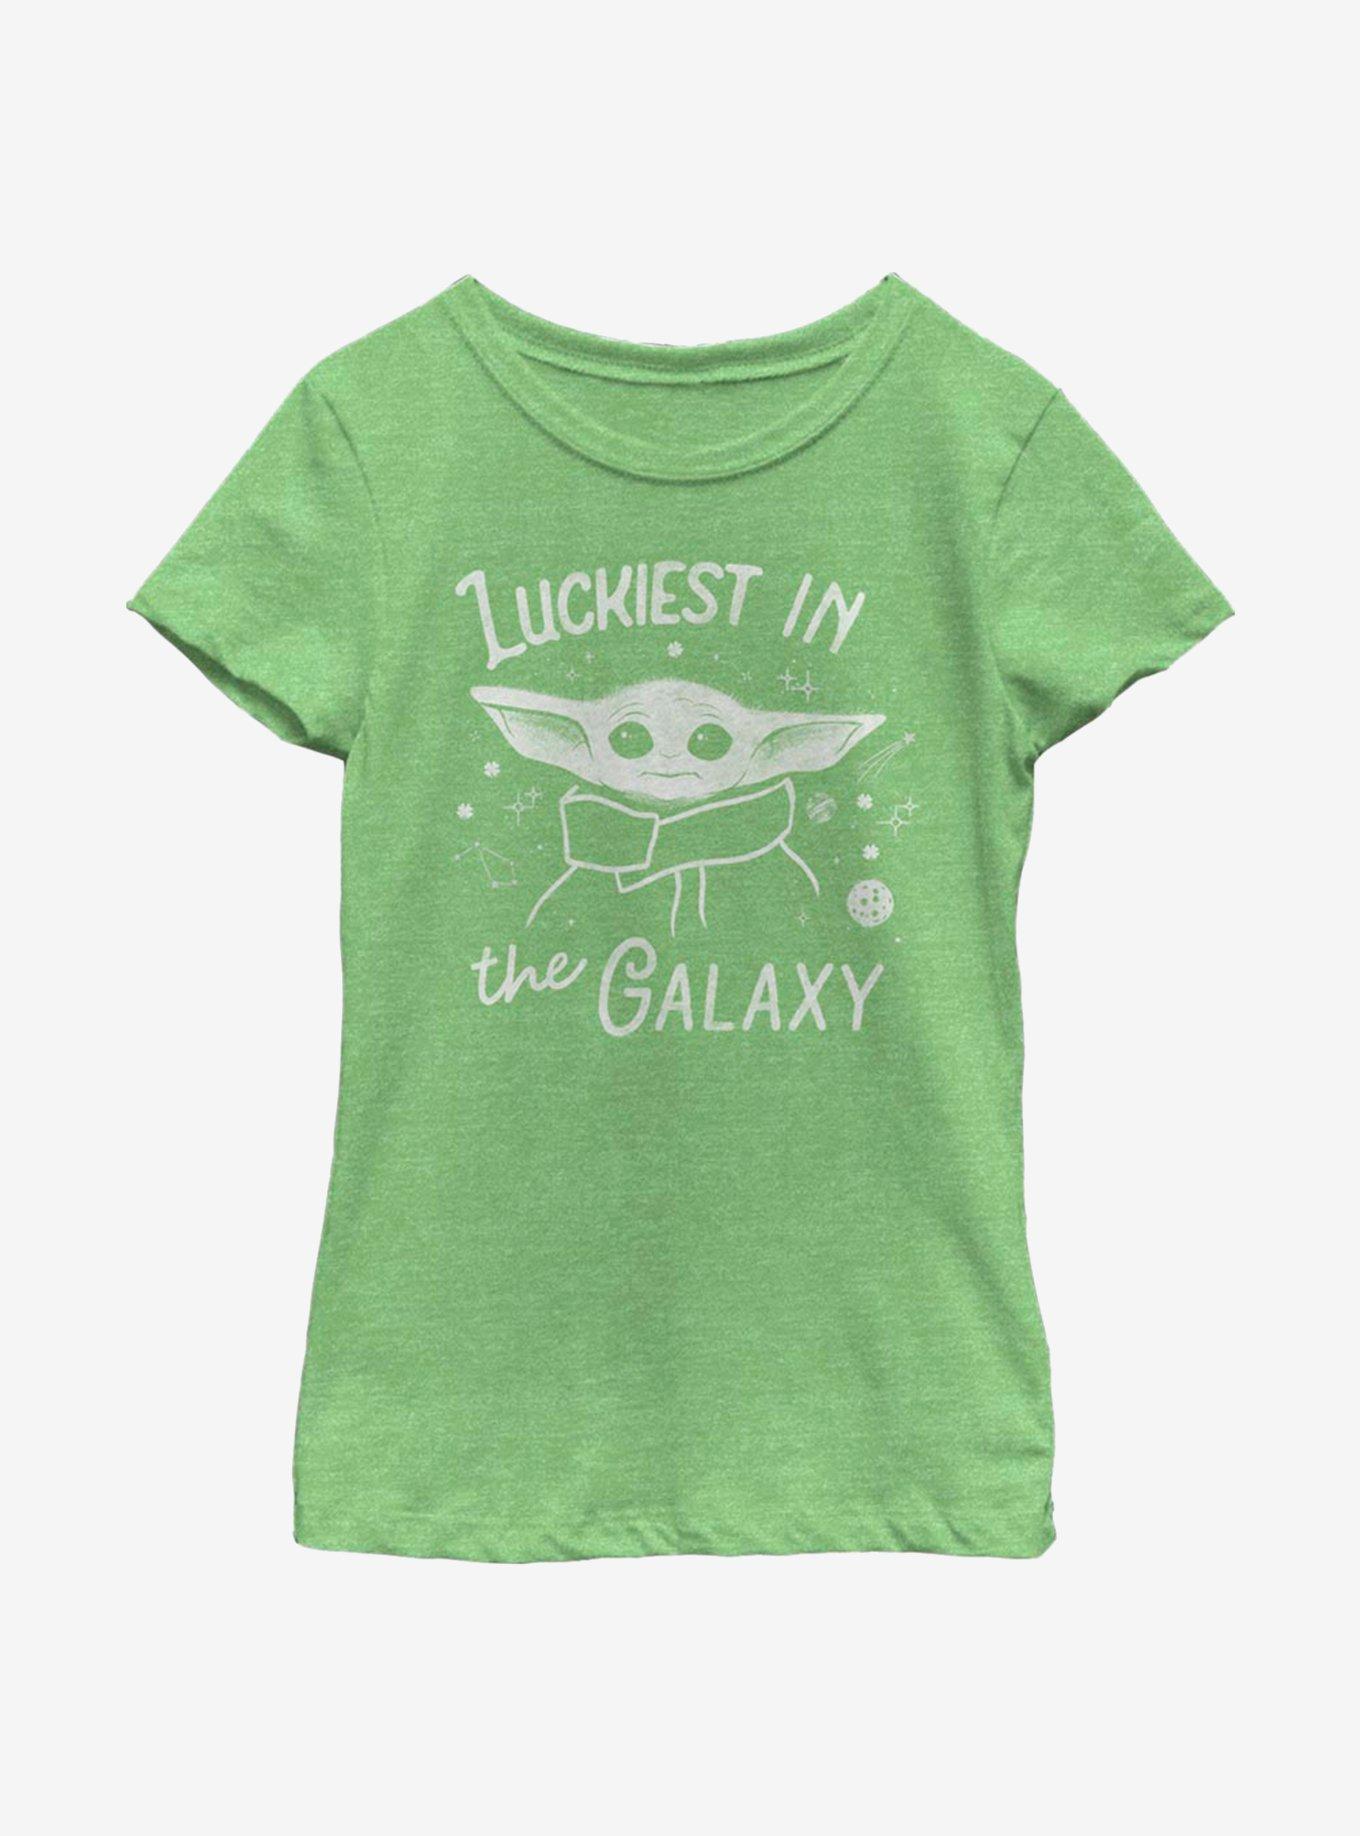 Star Wars The Mandalorian The Child Luckiest In The Galaxy Youth Girls T-Shirt, , hi-res